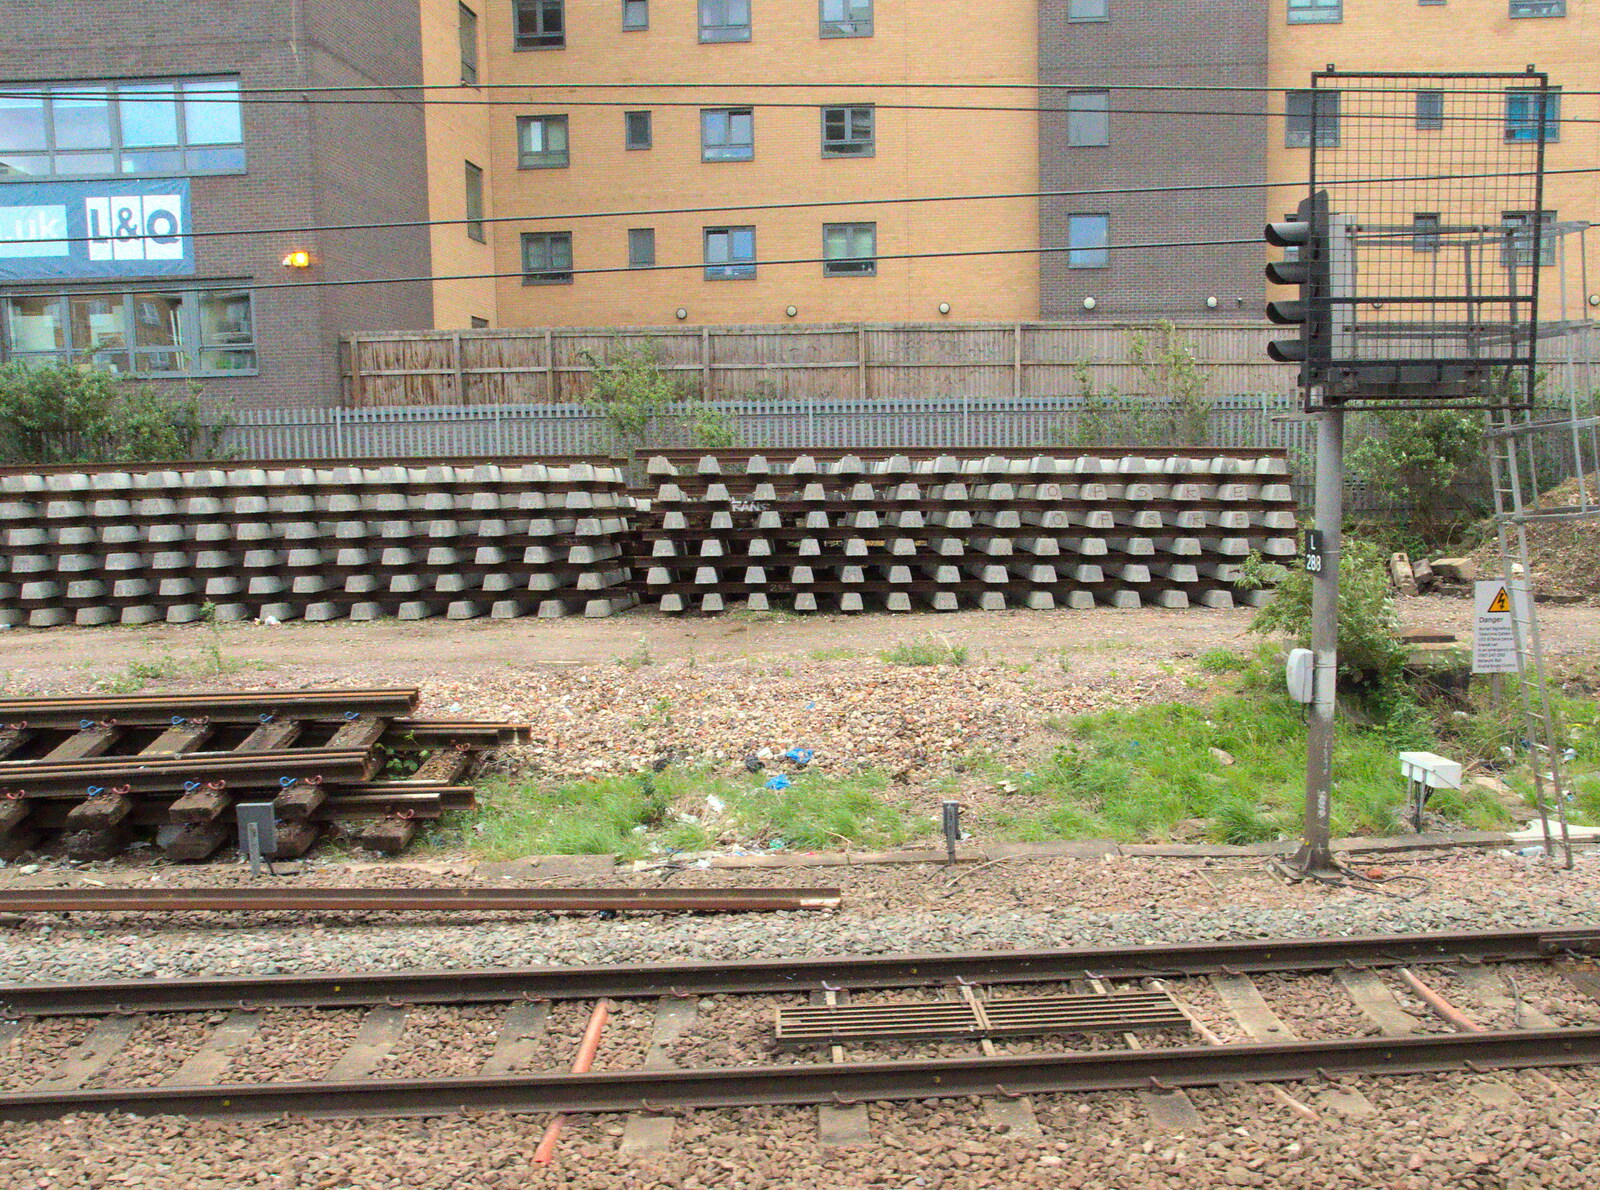 A pile of tracks, like a model railway from Diss Kebabs and Pizza Express, Ipswich, Suffolk - 7th May 2015